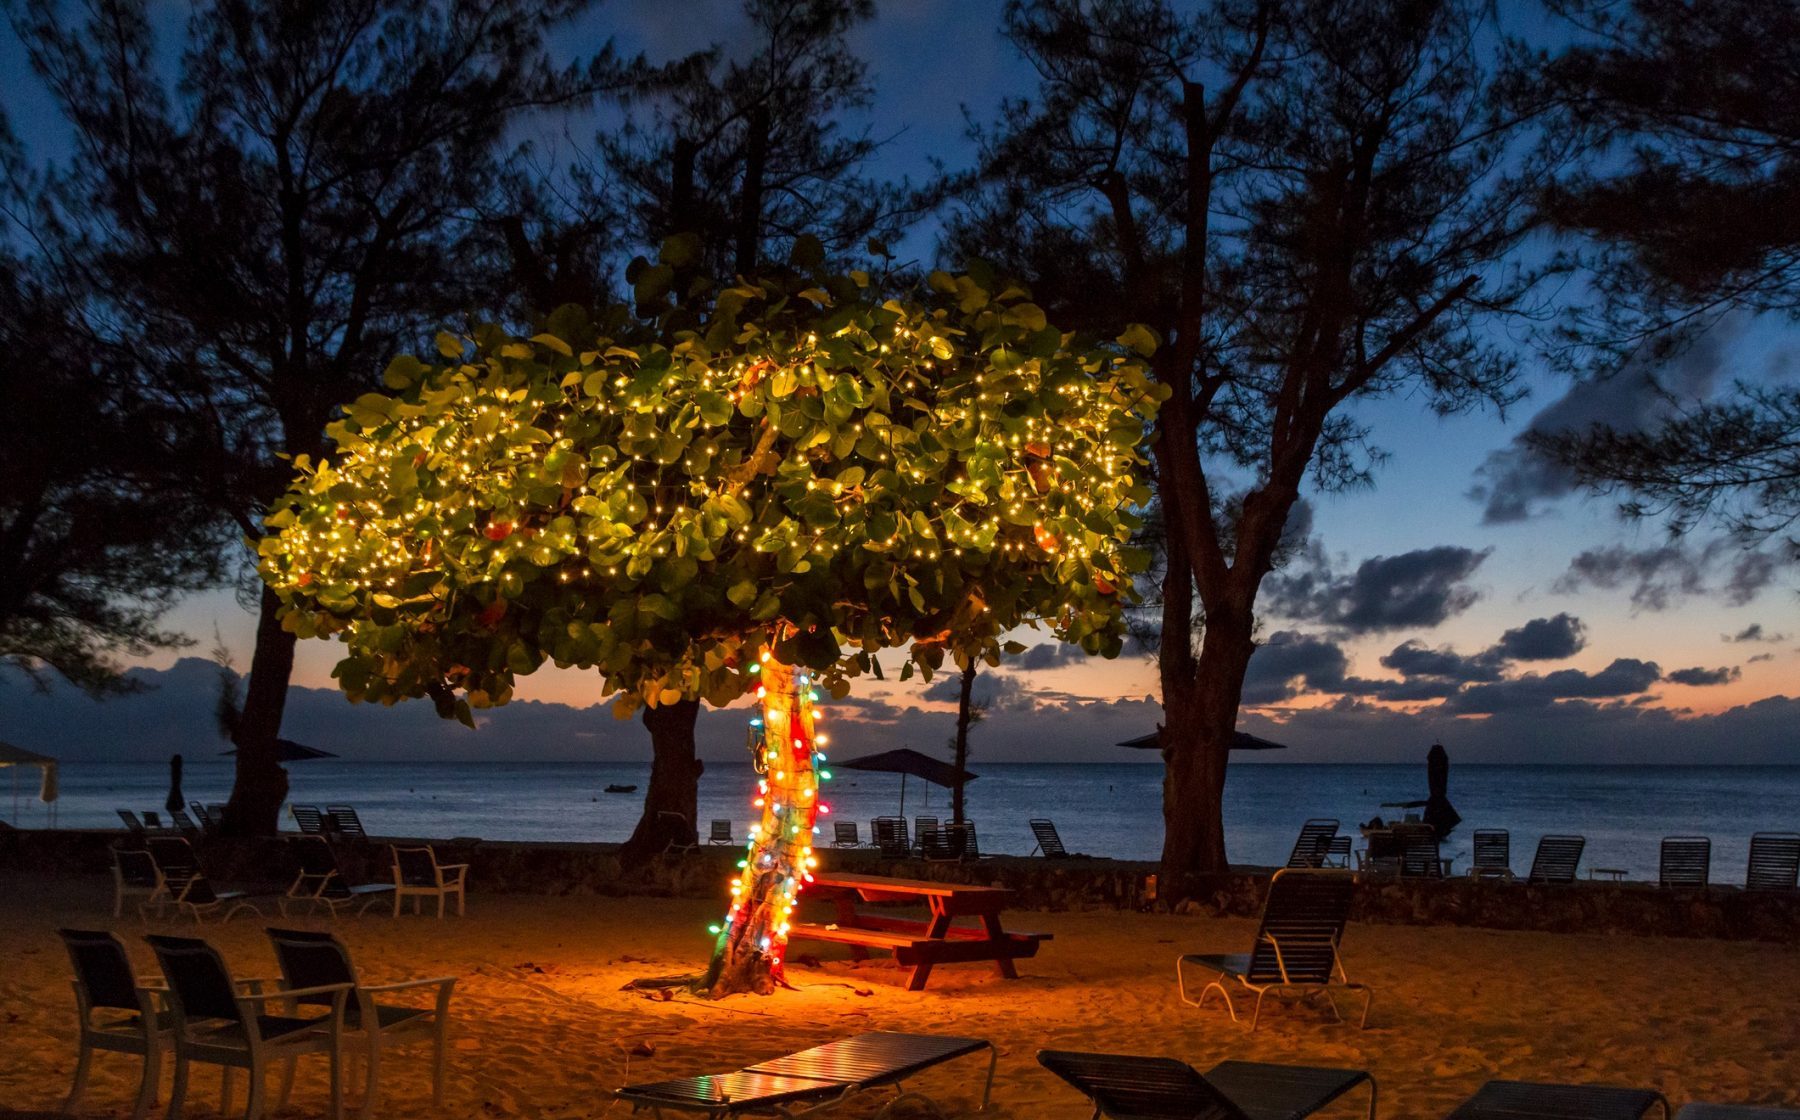 How to Spend the Holidays in the Cayman Islands & Have the Best Cayman